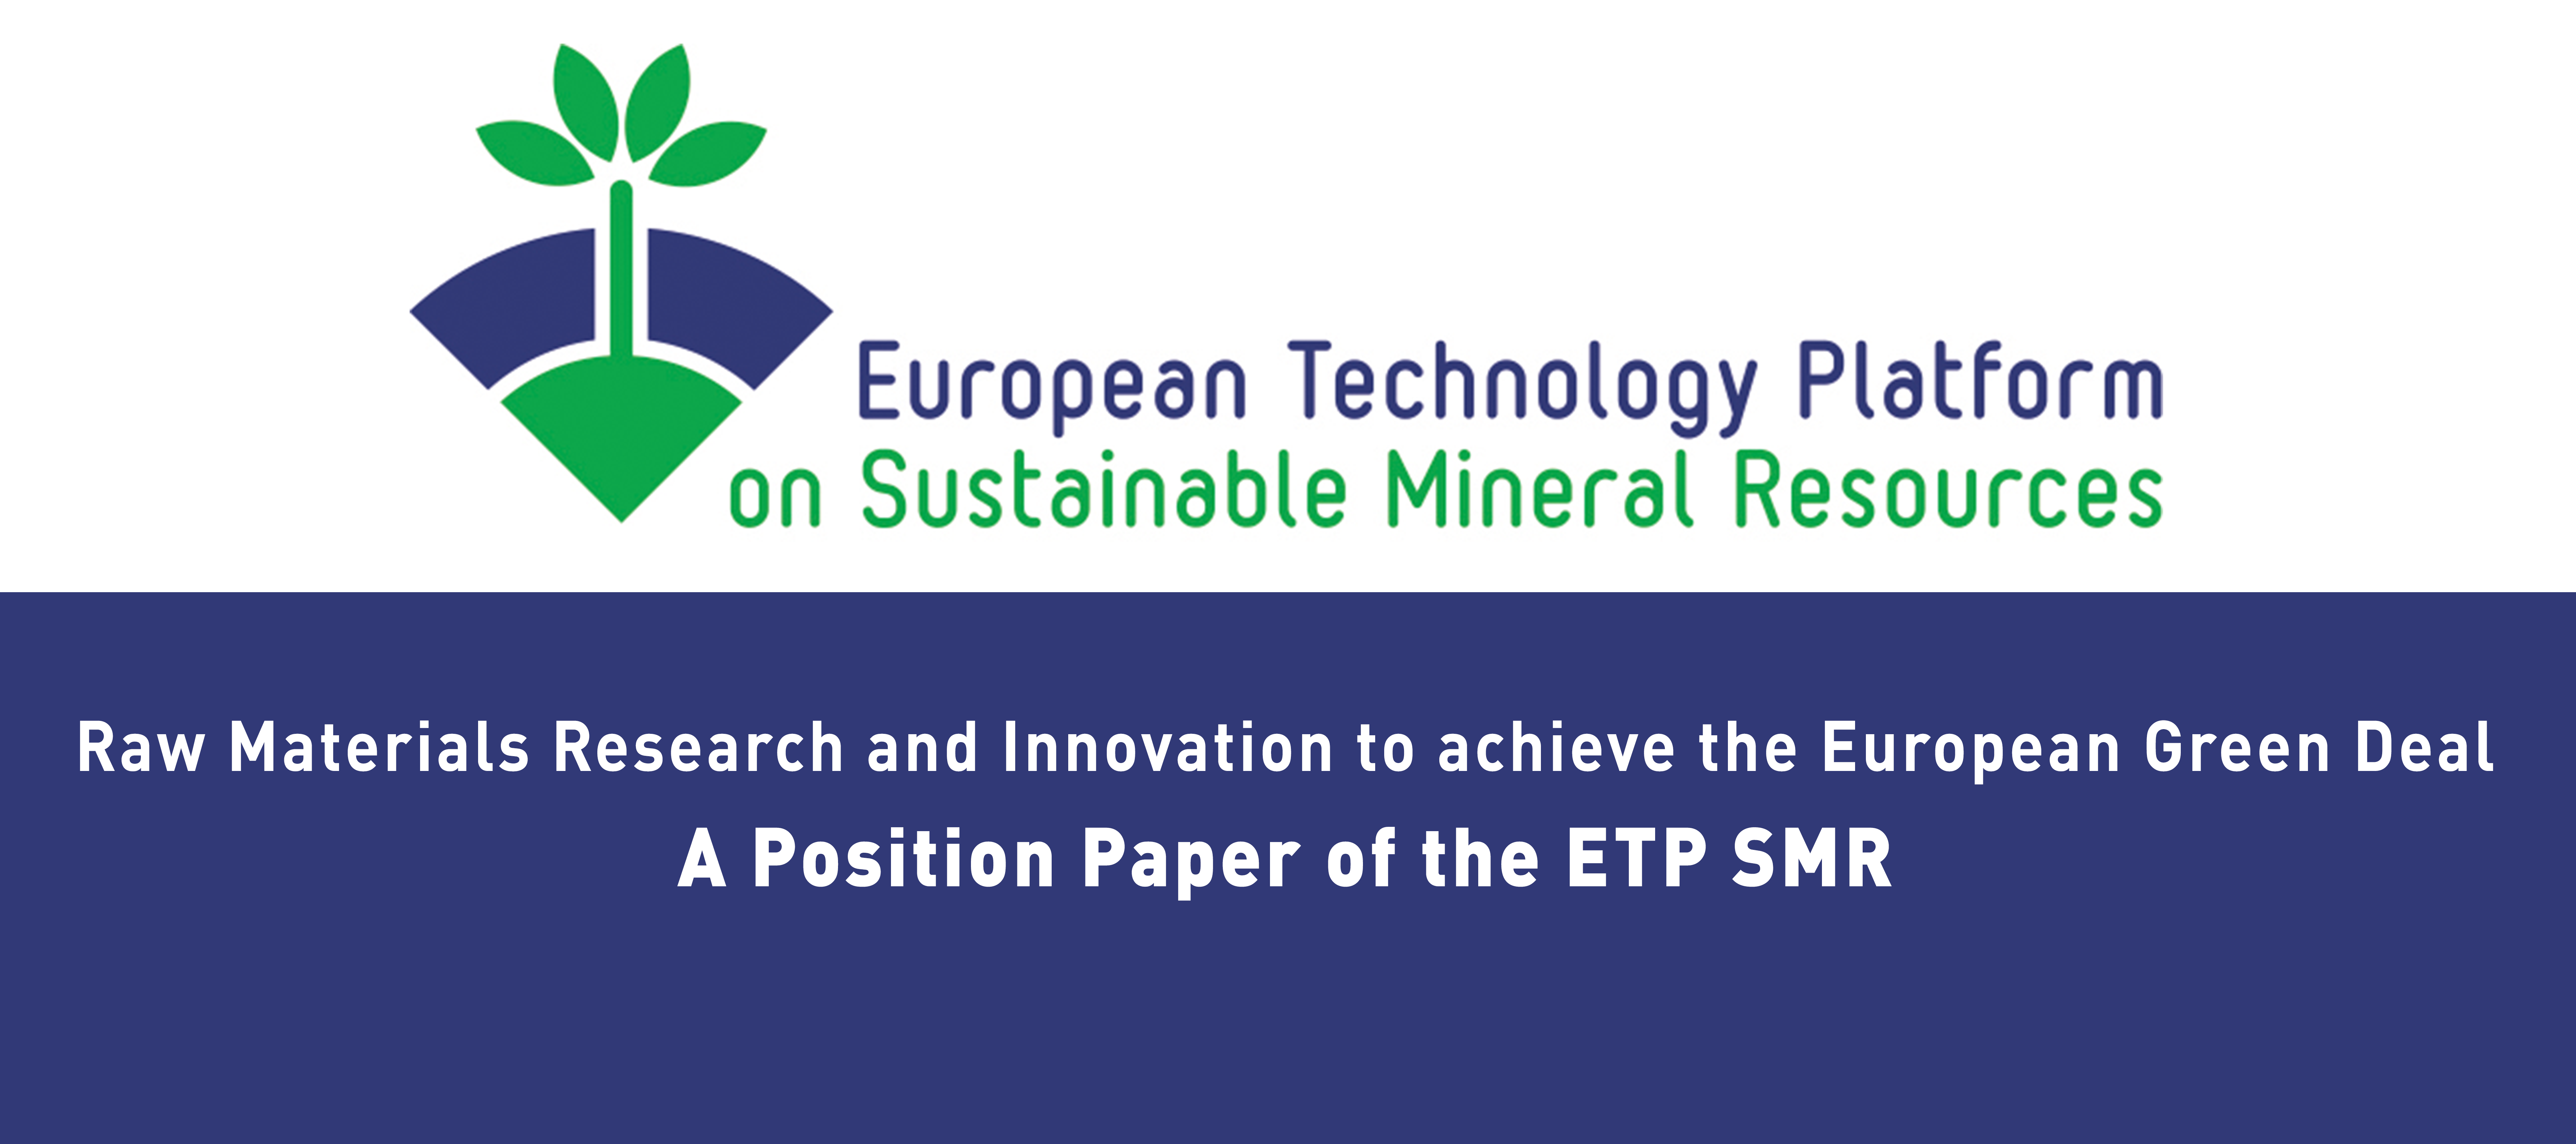 ETP SMR Position Paper: Raw Materials Research and Innovation to achieve the European Green Deal